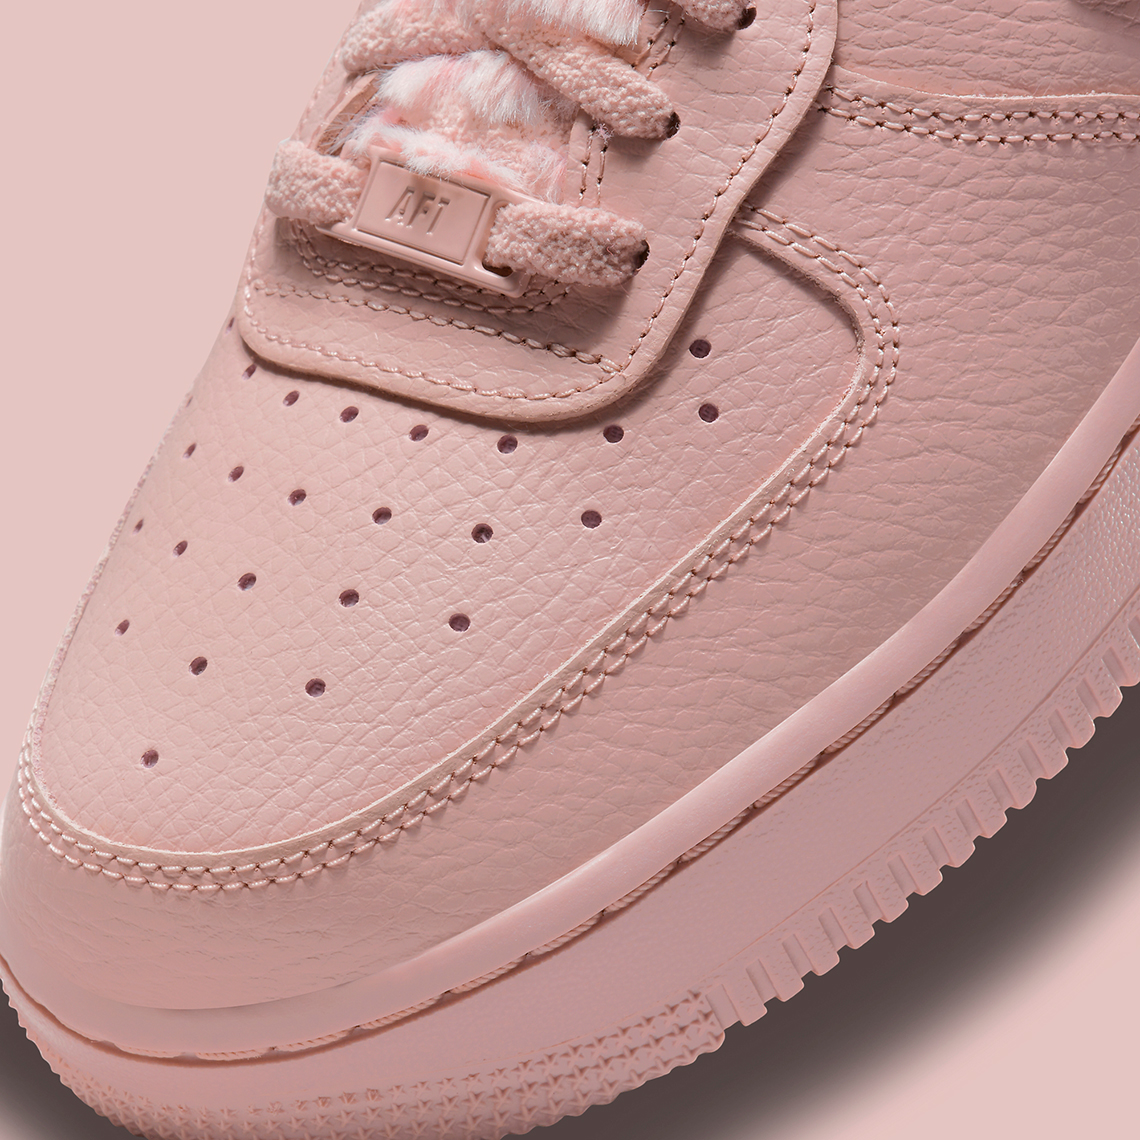 Nike Air Force 1 Low Pink Do6724 601 8